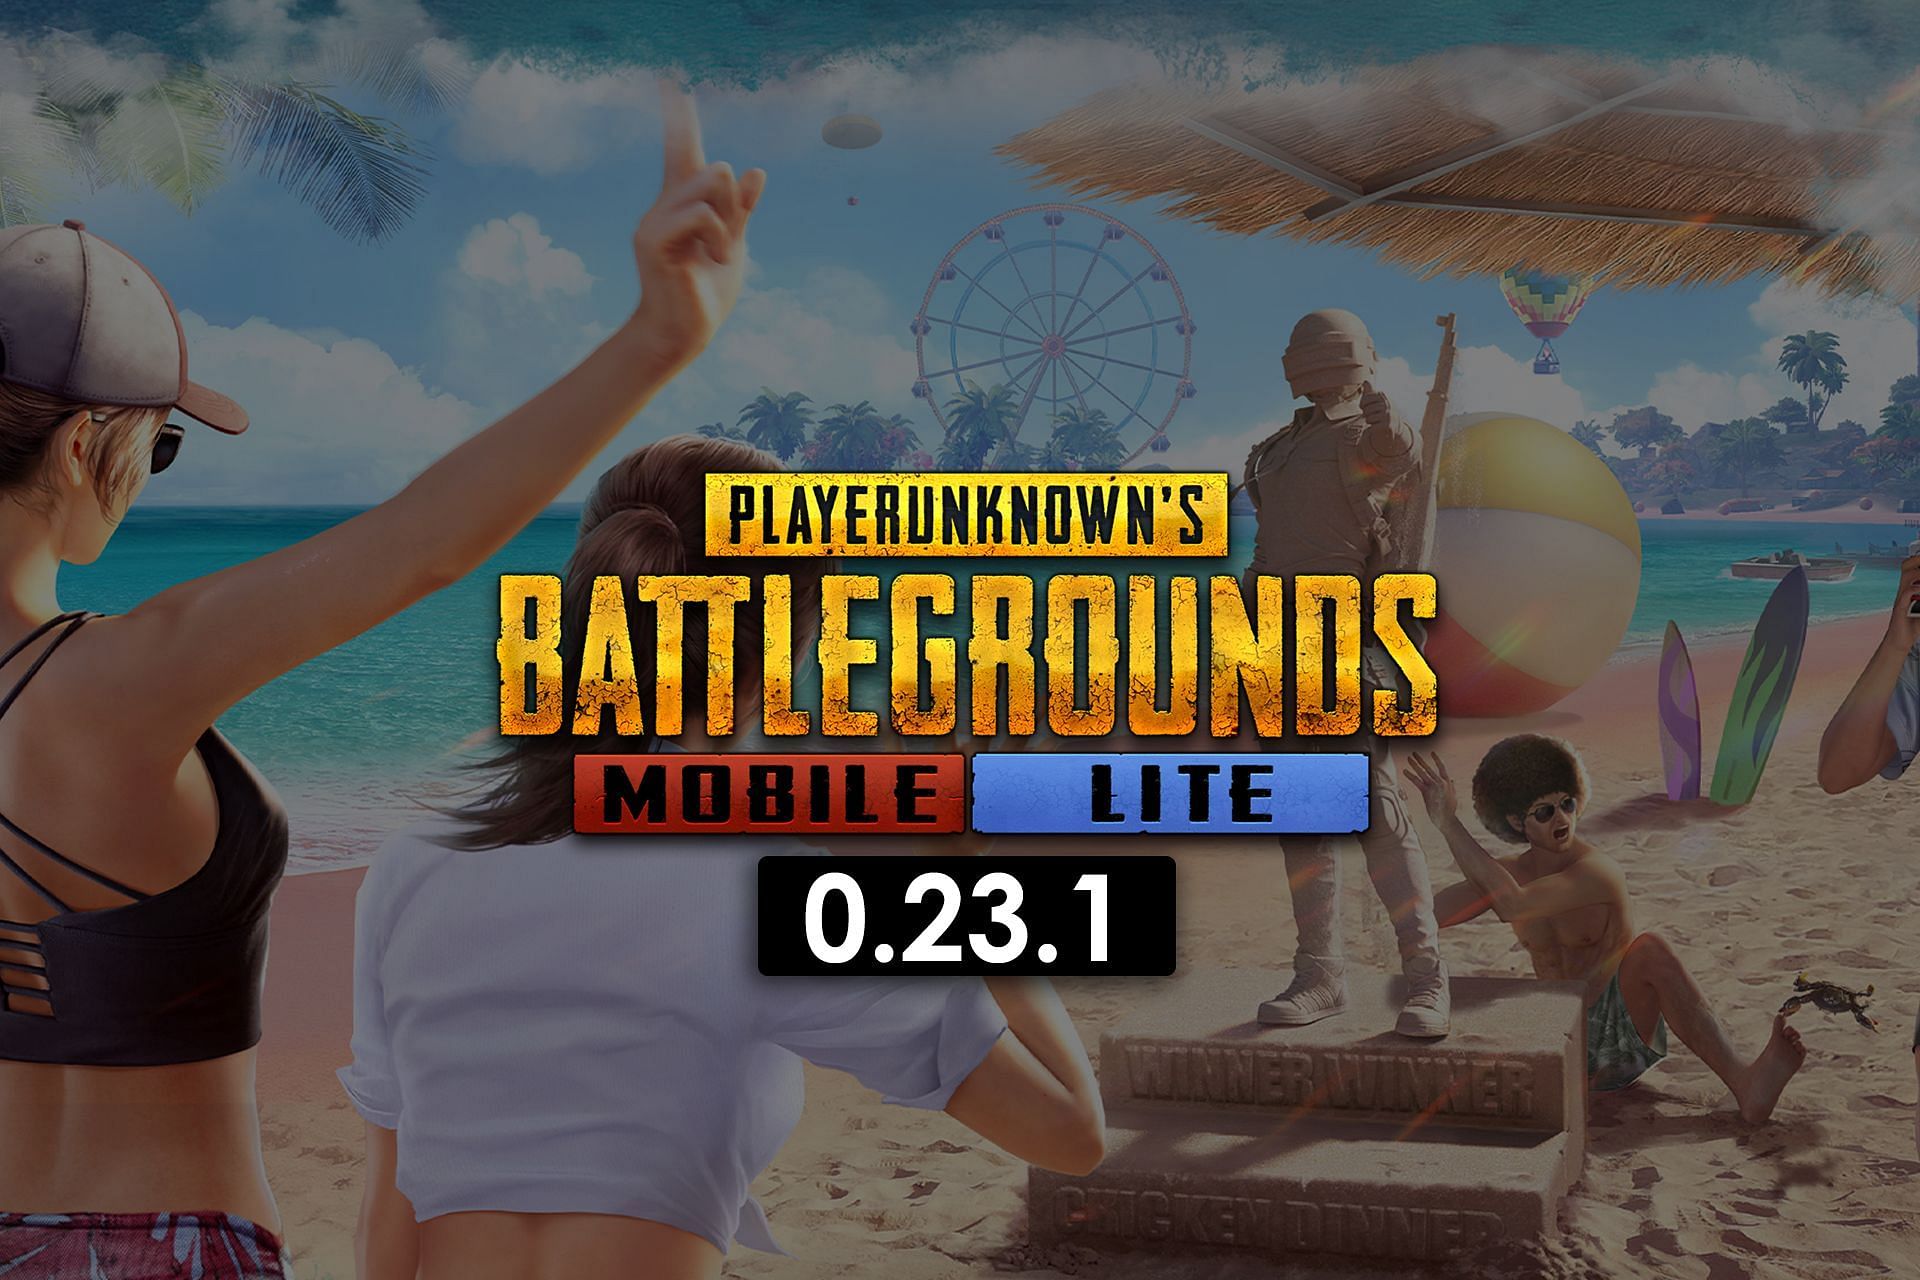 How to download and install new PUBG Mobile Lite 0.23.1 using APK file